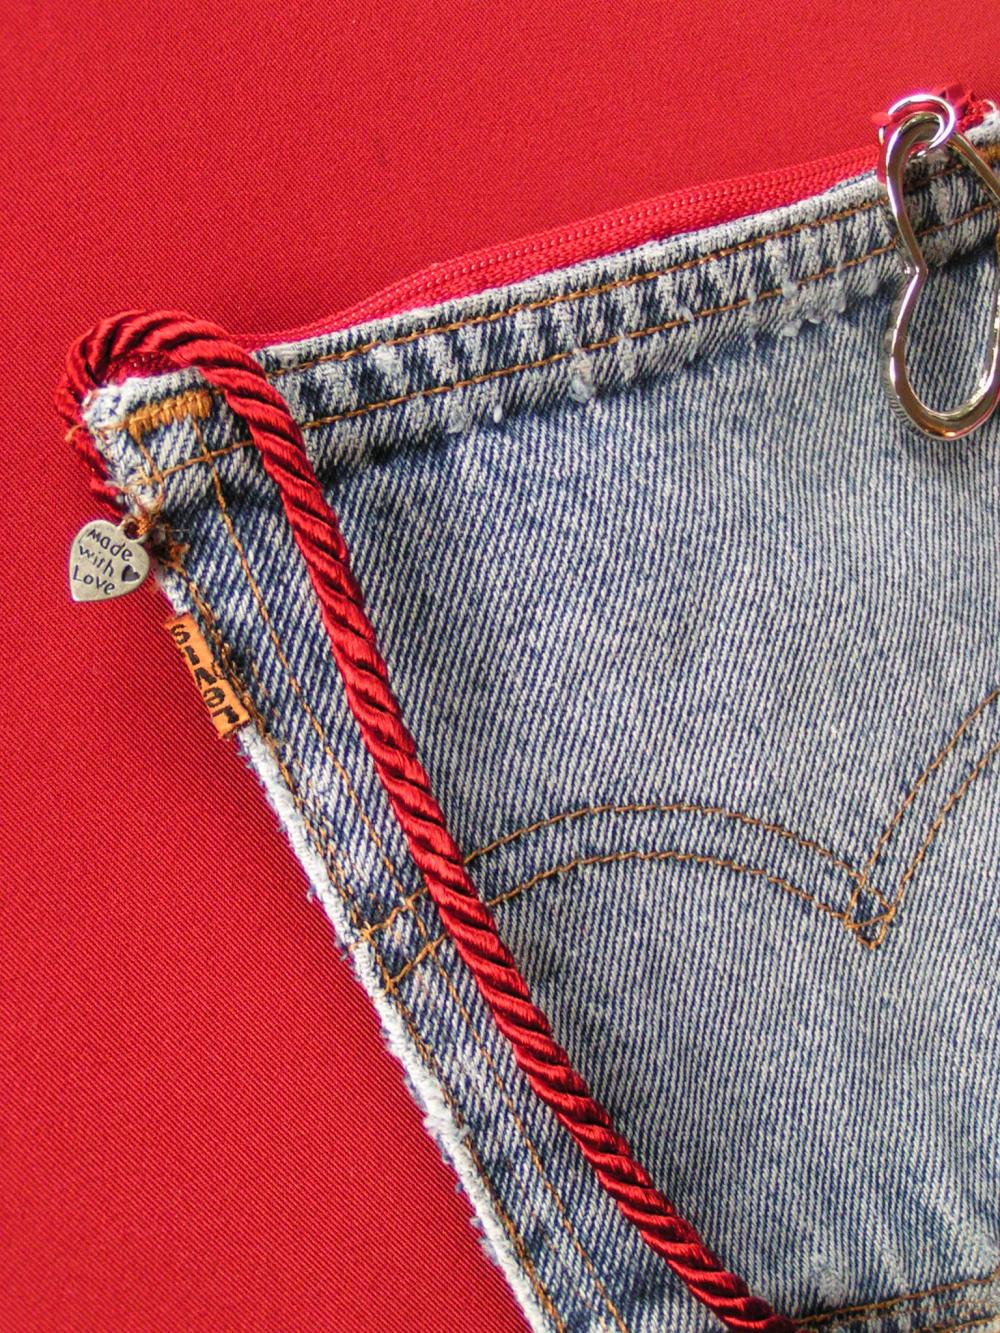 Upcycled Denim Levi's Pocket Purse Red Zipper, Red Cord